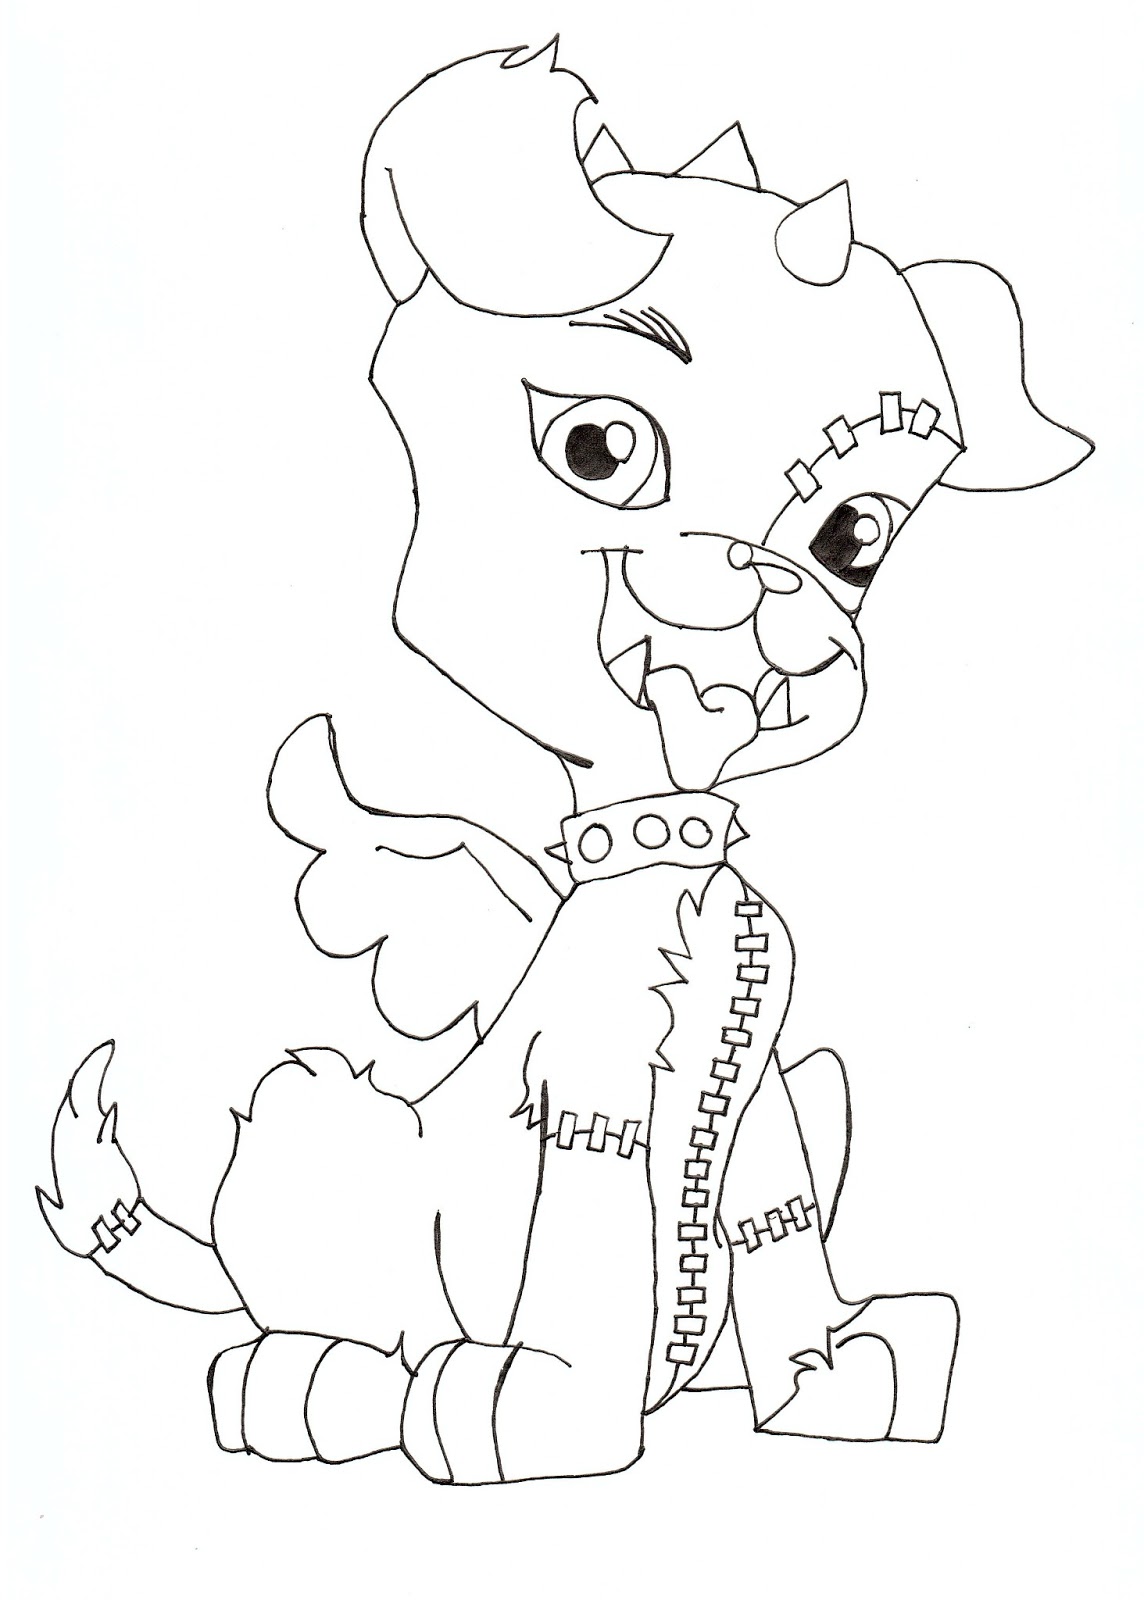  Monster high coloring pages | Coloring pages for girls | #13